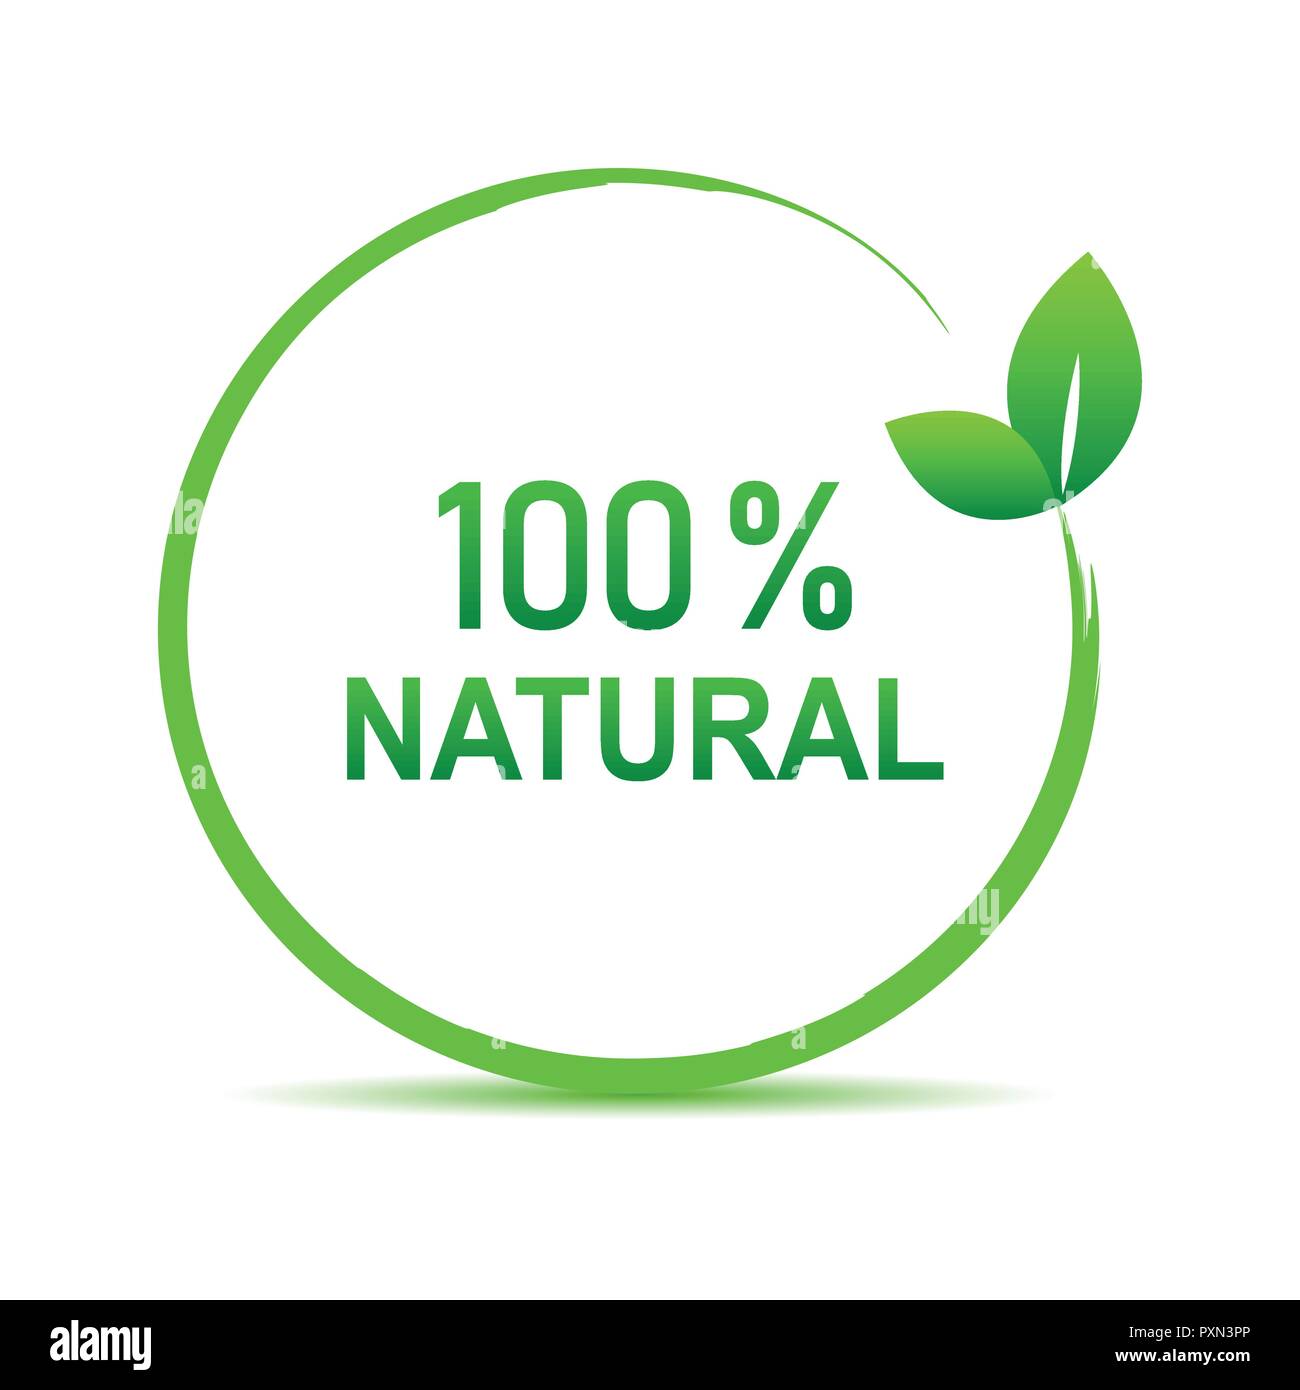 100 percent natural green symbol with leaf vector illustration EPS10 Stock Vector